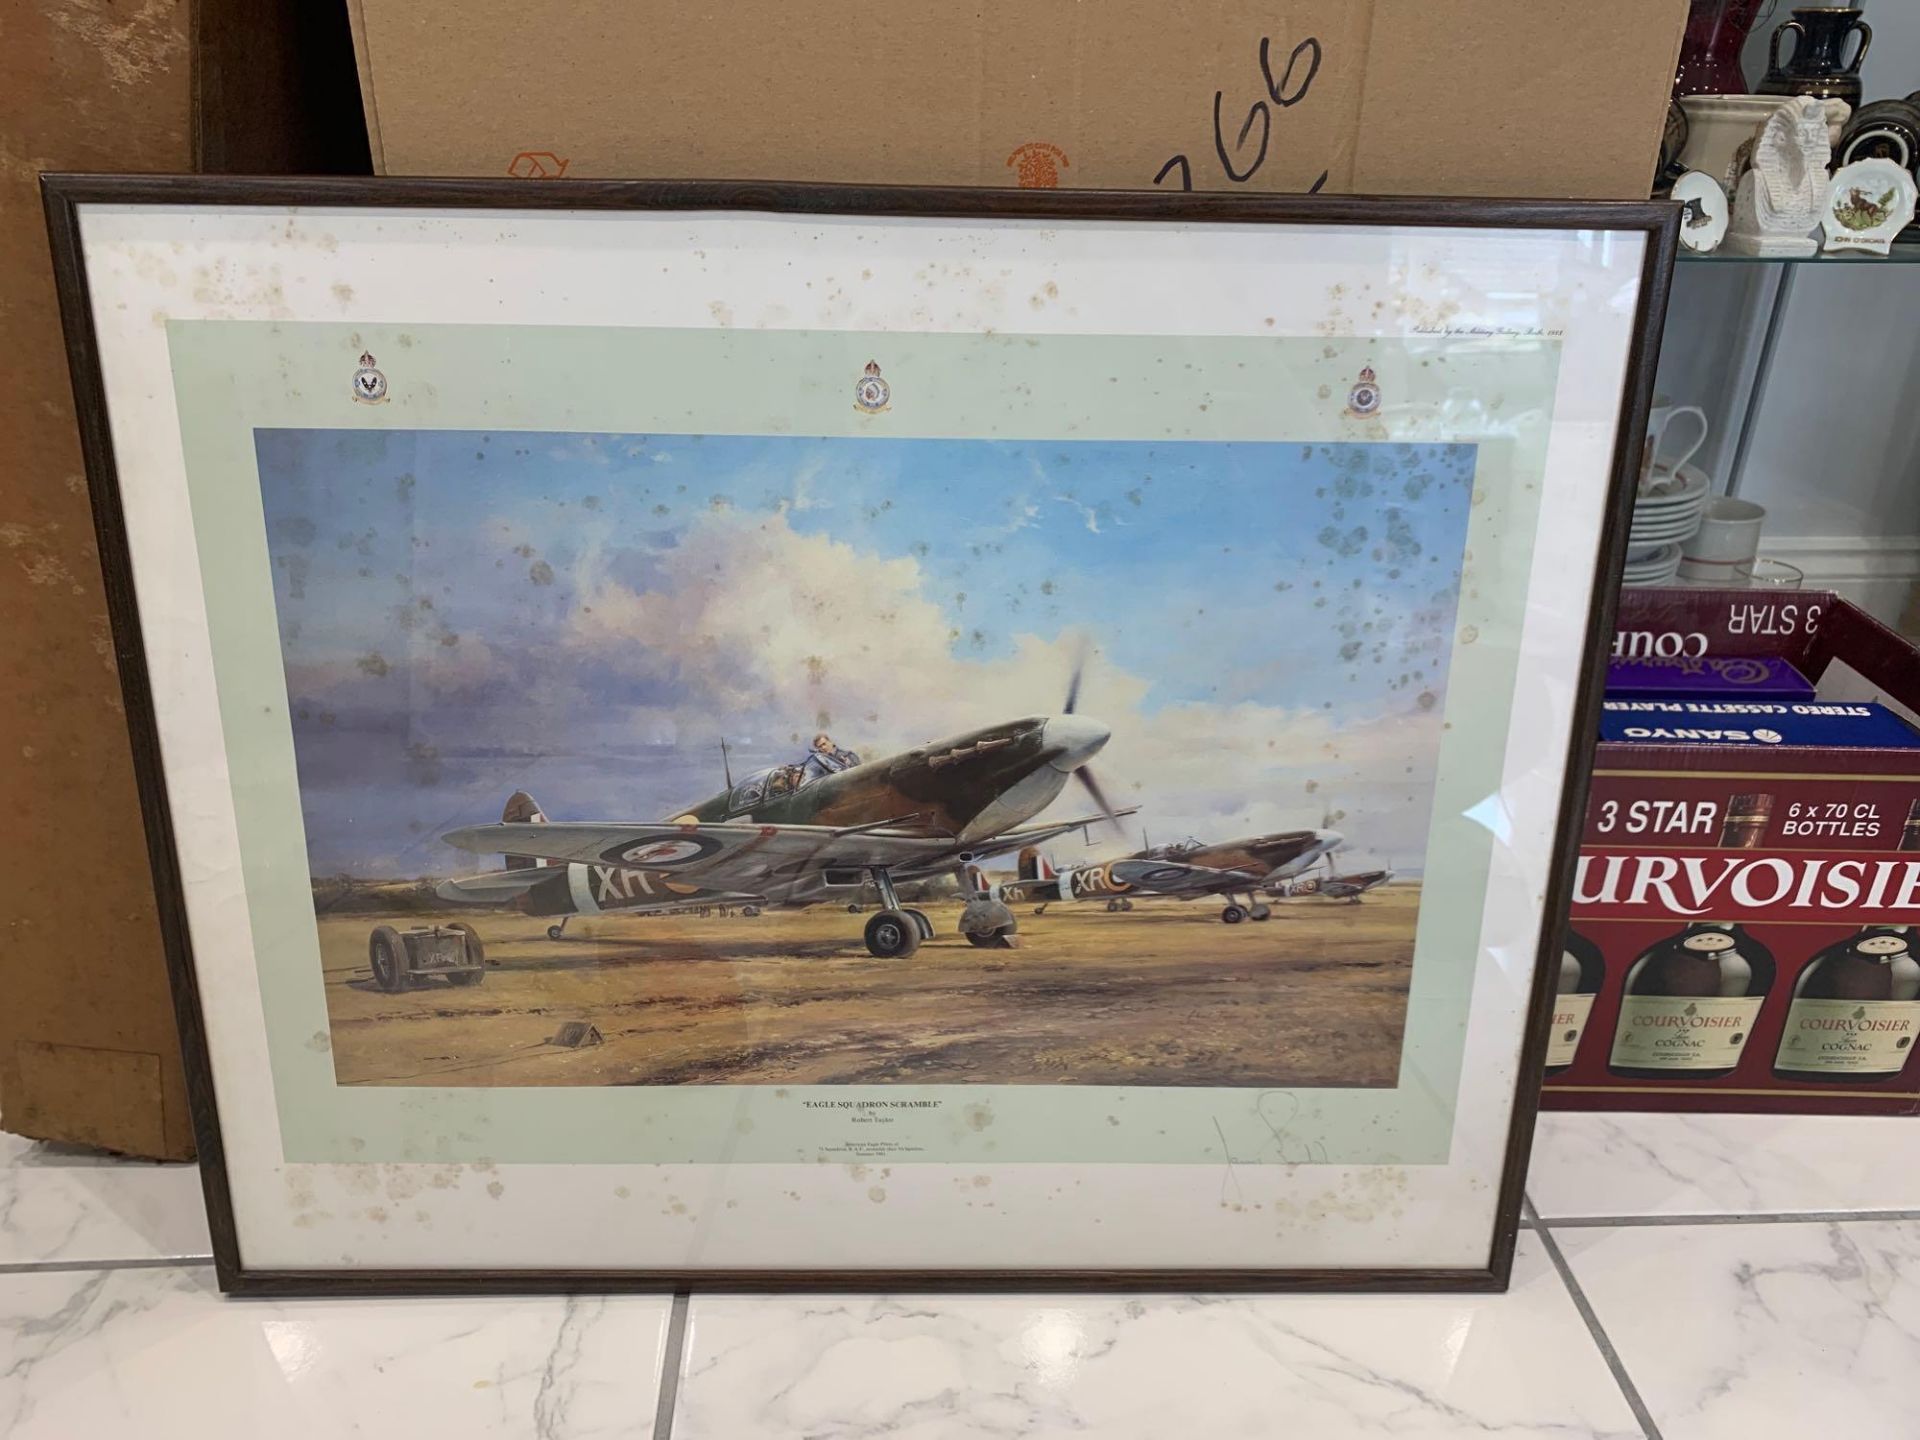 Limited Edition Print By Robert Taylor Titled Eagle Squadron Scramble Signed By Colonel Jim